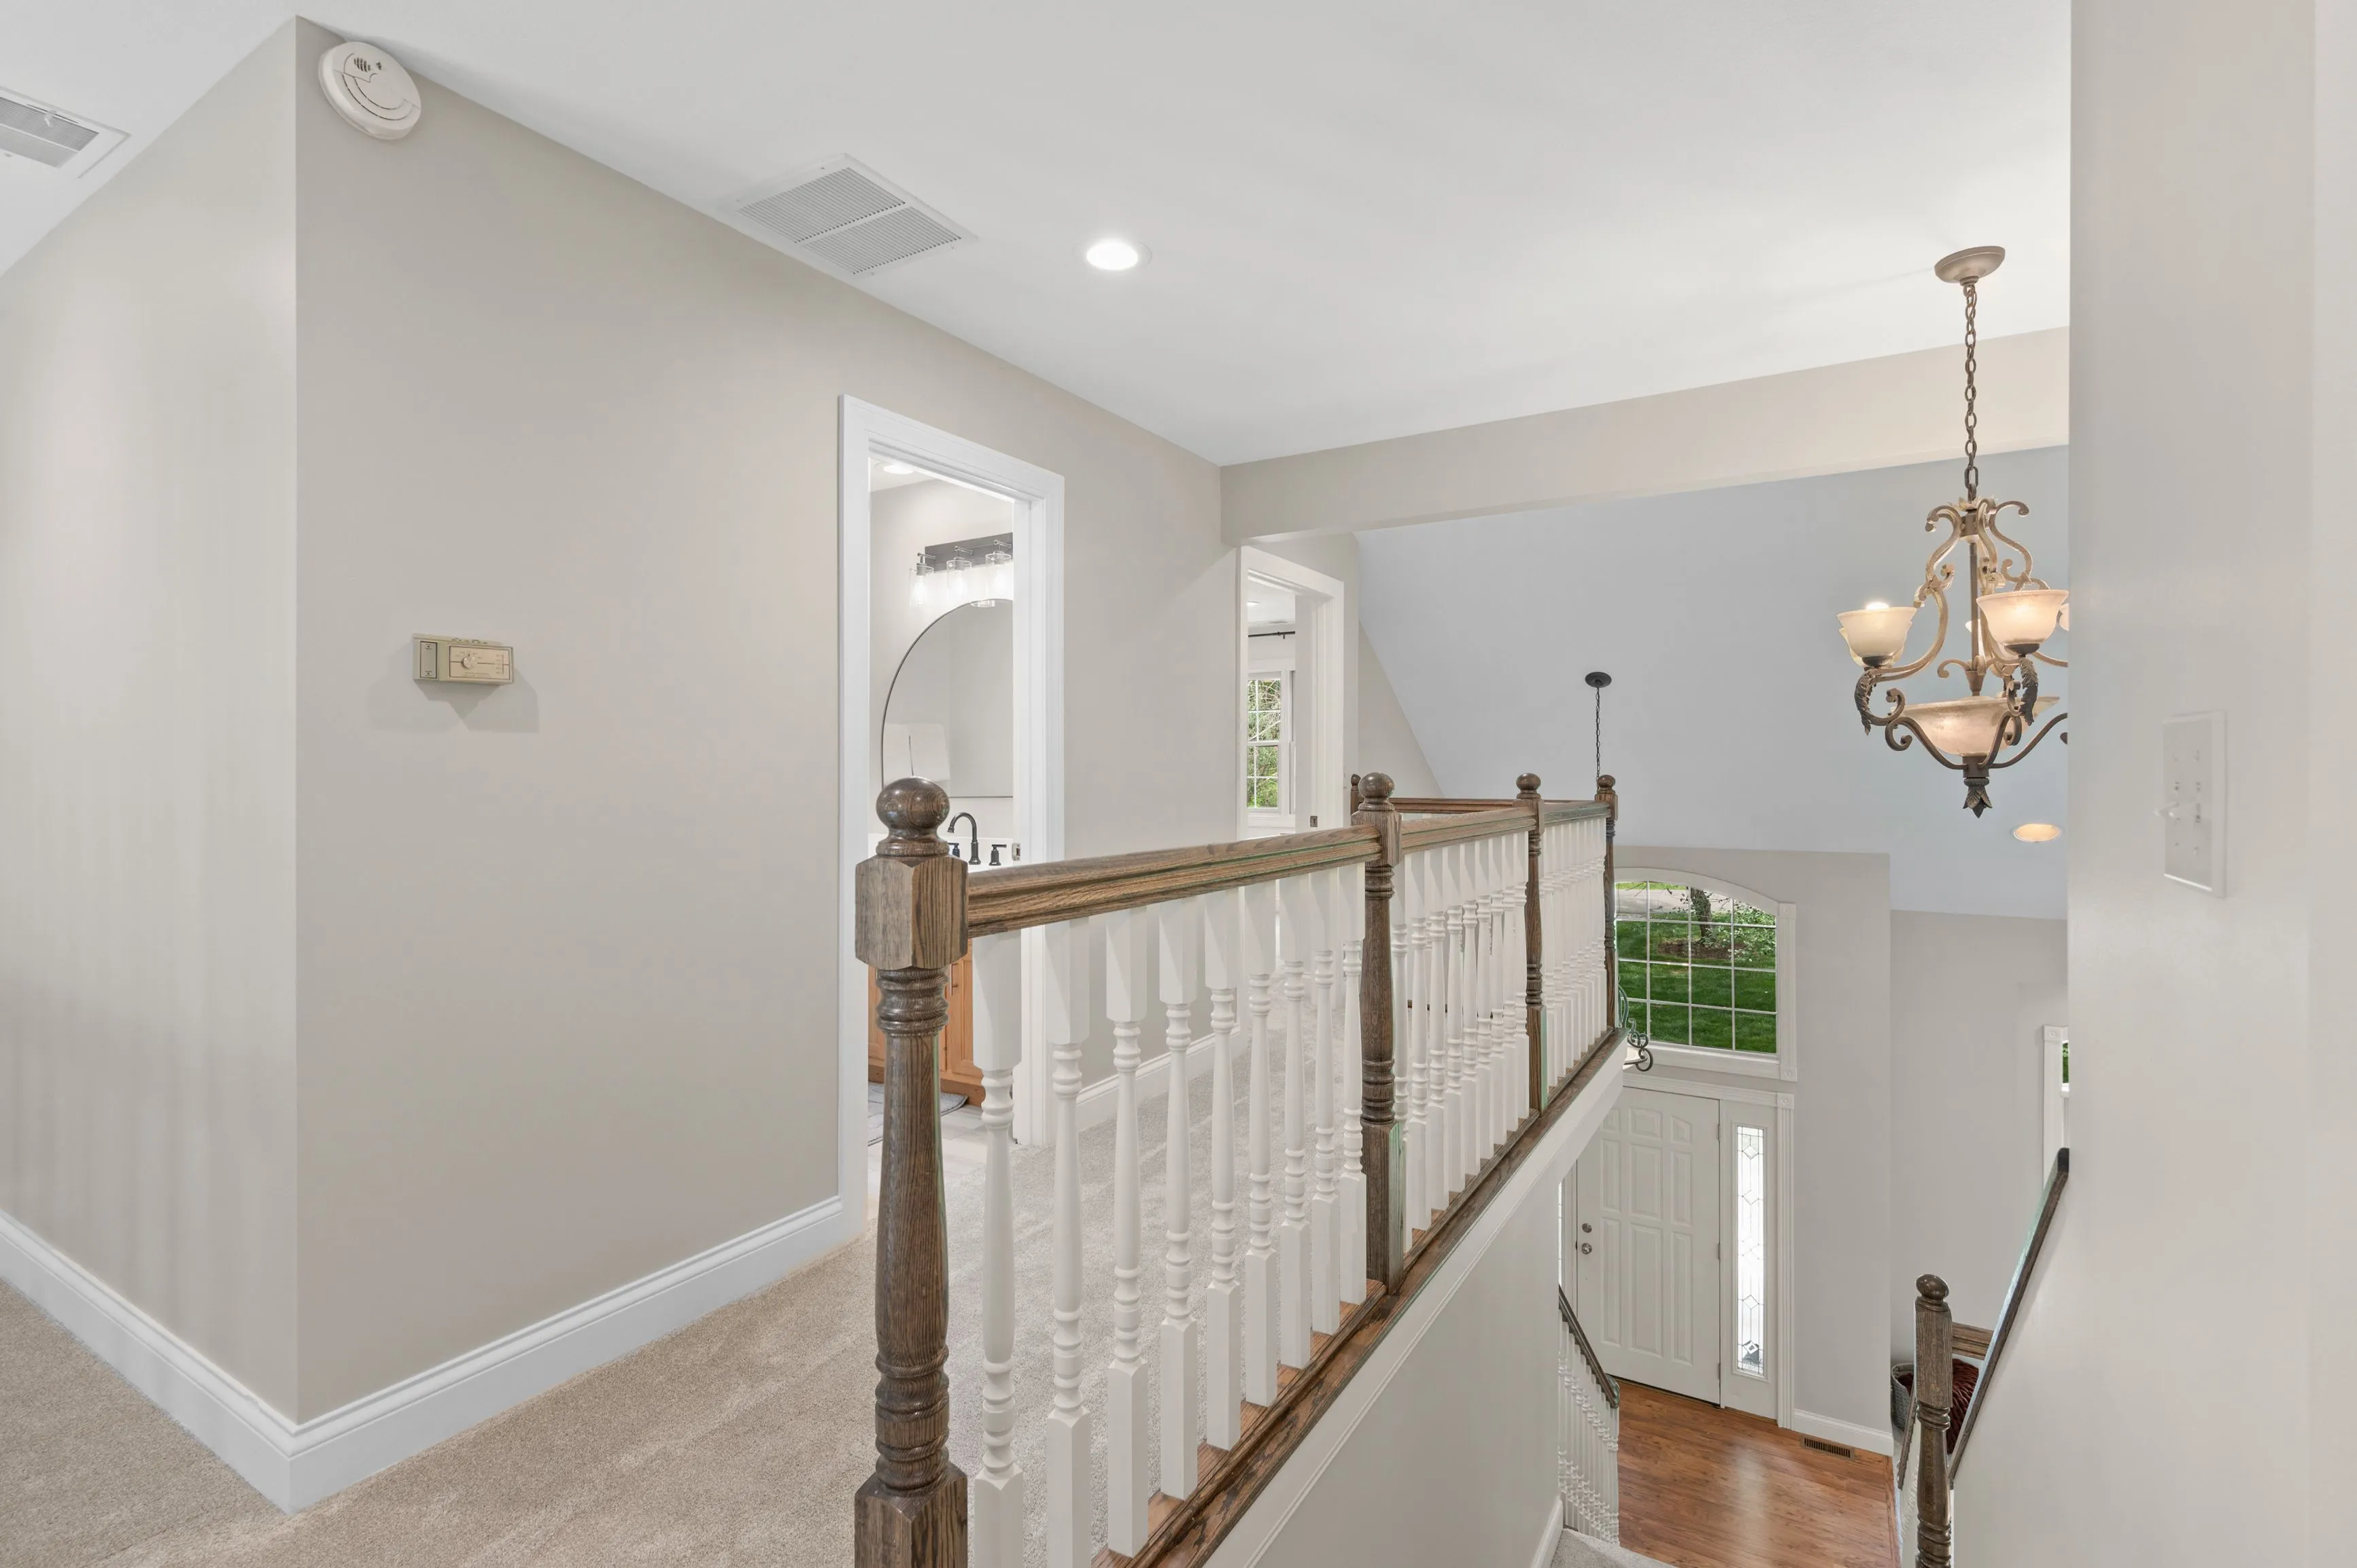 Bright upper landing area with beige walls, a wooden balustrade, and a classic chandelier overlooking an entrance with a white door.